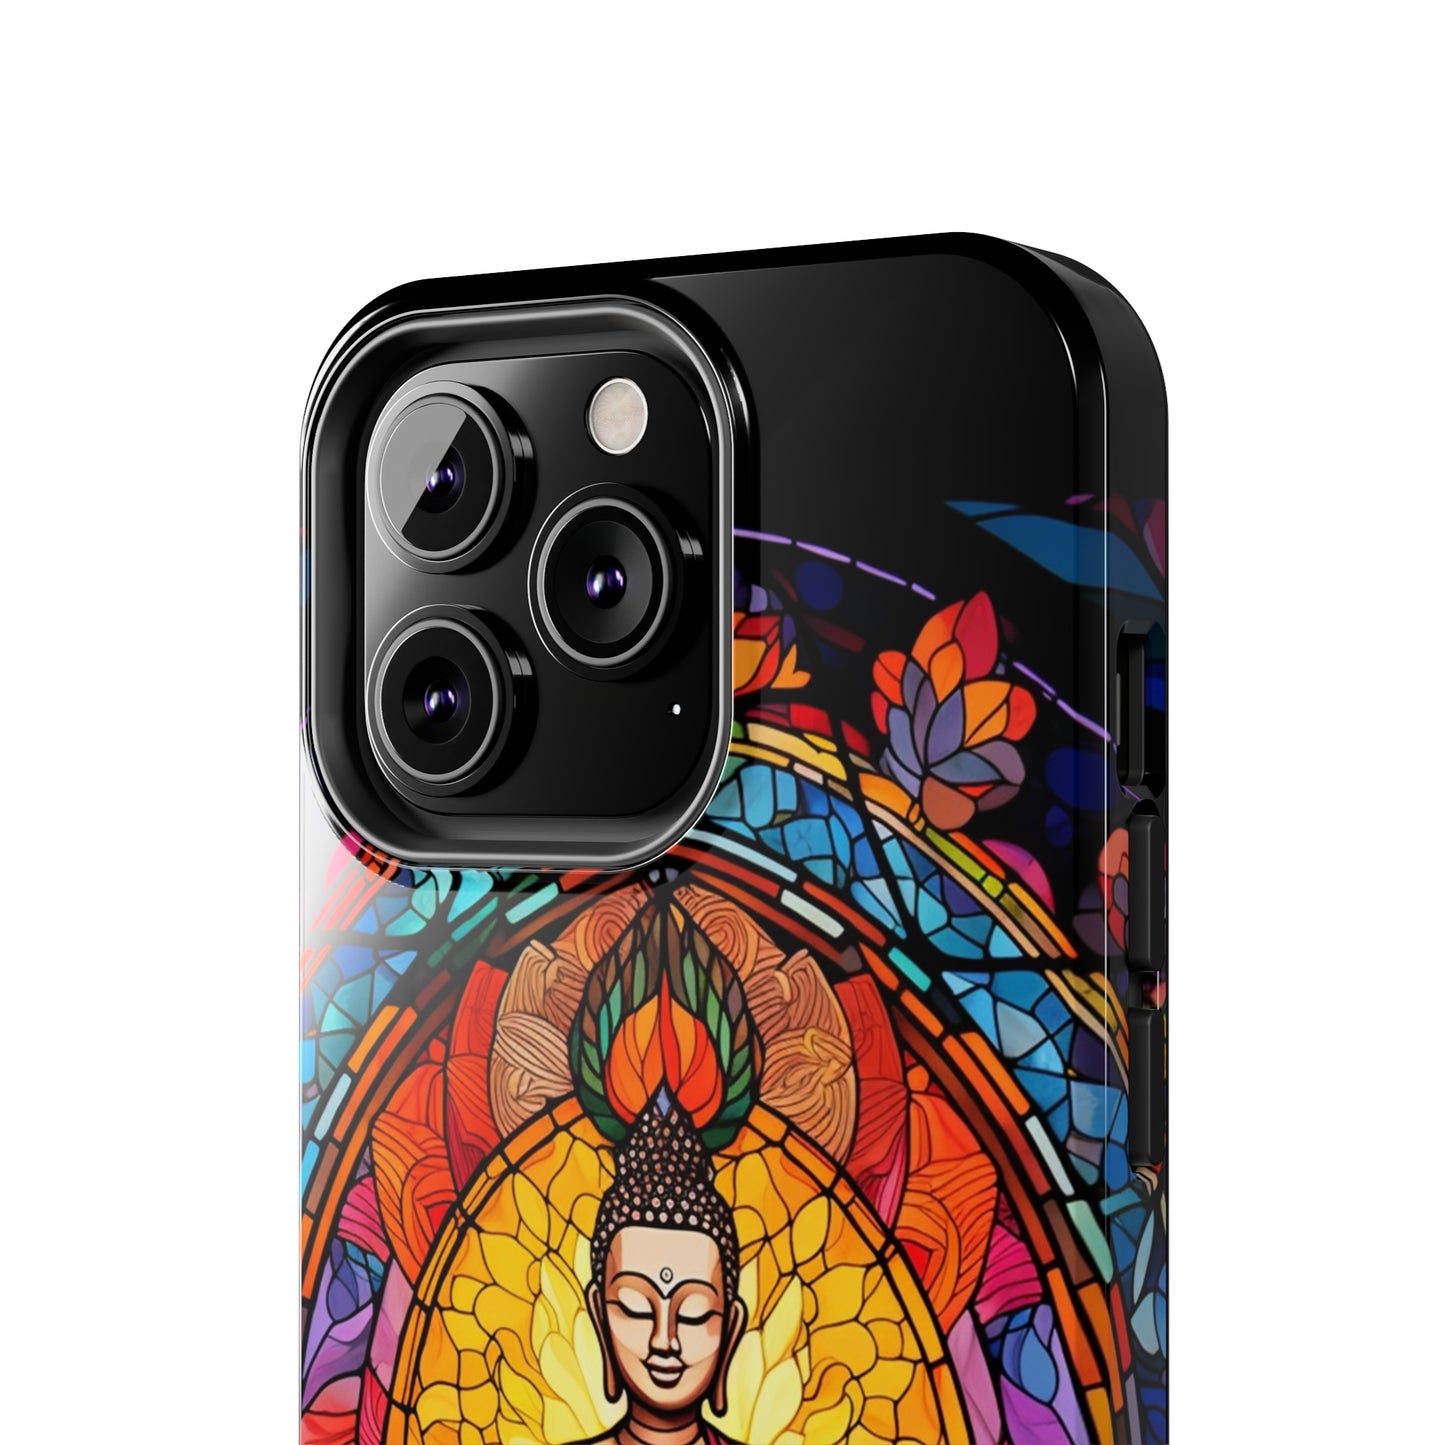 Stained Glass Magic iPhone Case: Psychedelic Tibet Buddha Mandala | iPhone 13 Case Mystical Tibetan Artistry